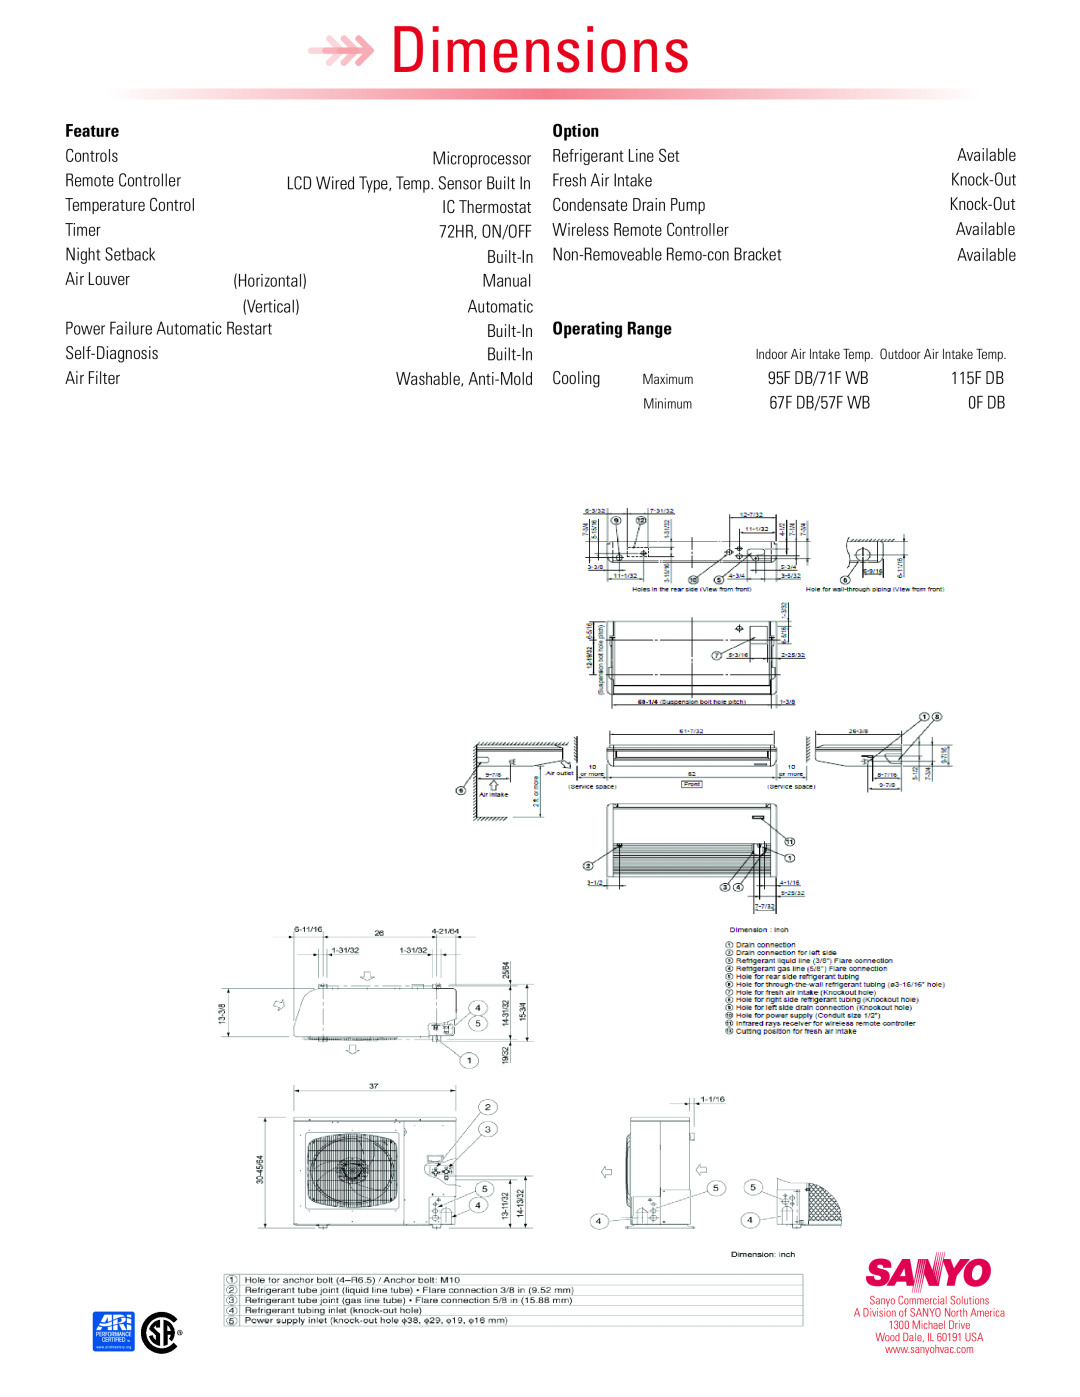 Sanyo THW3672R dimensions Dimensions, Feature, Option, Operating Range 